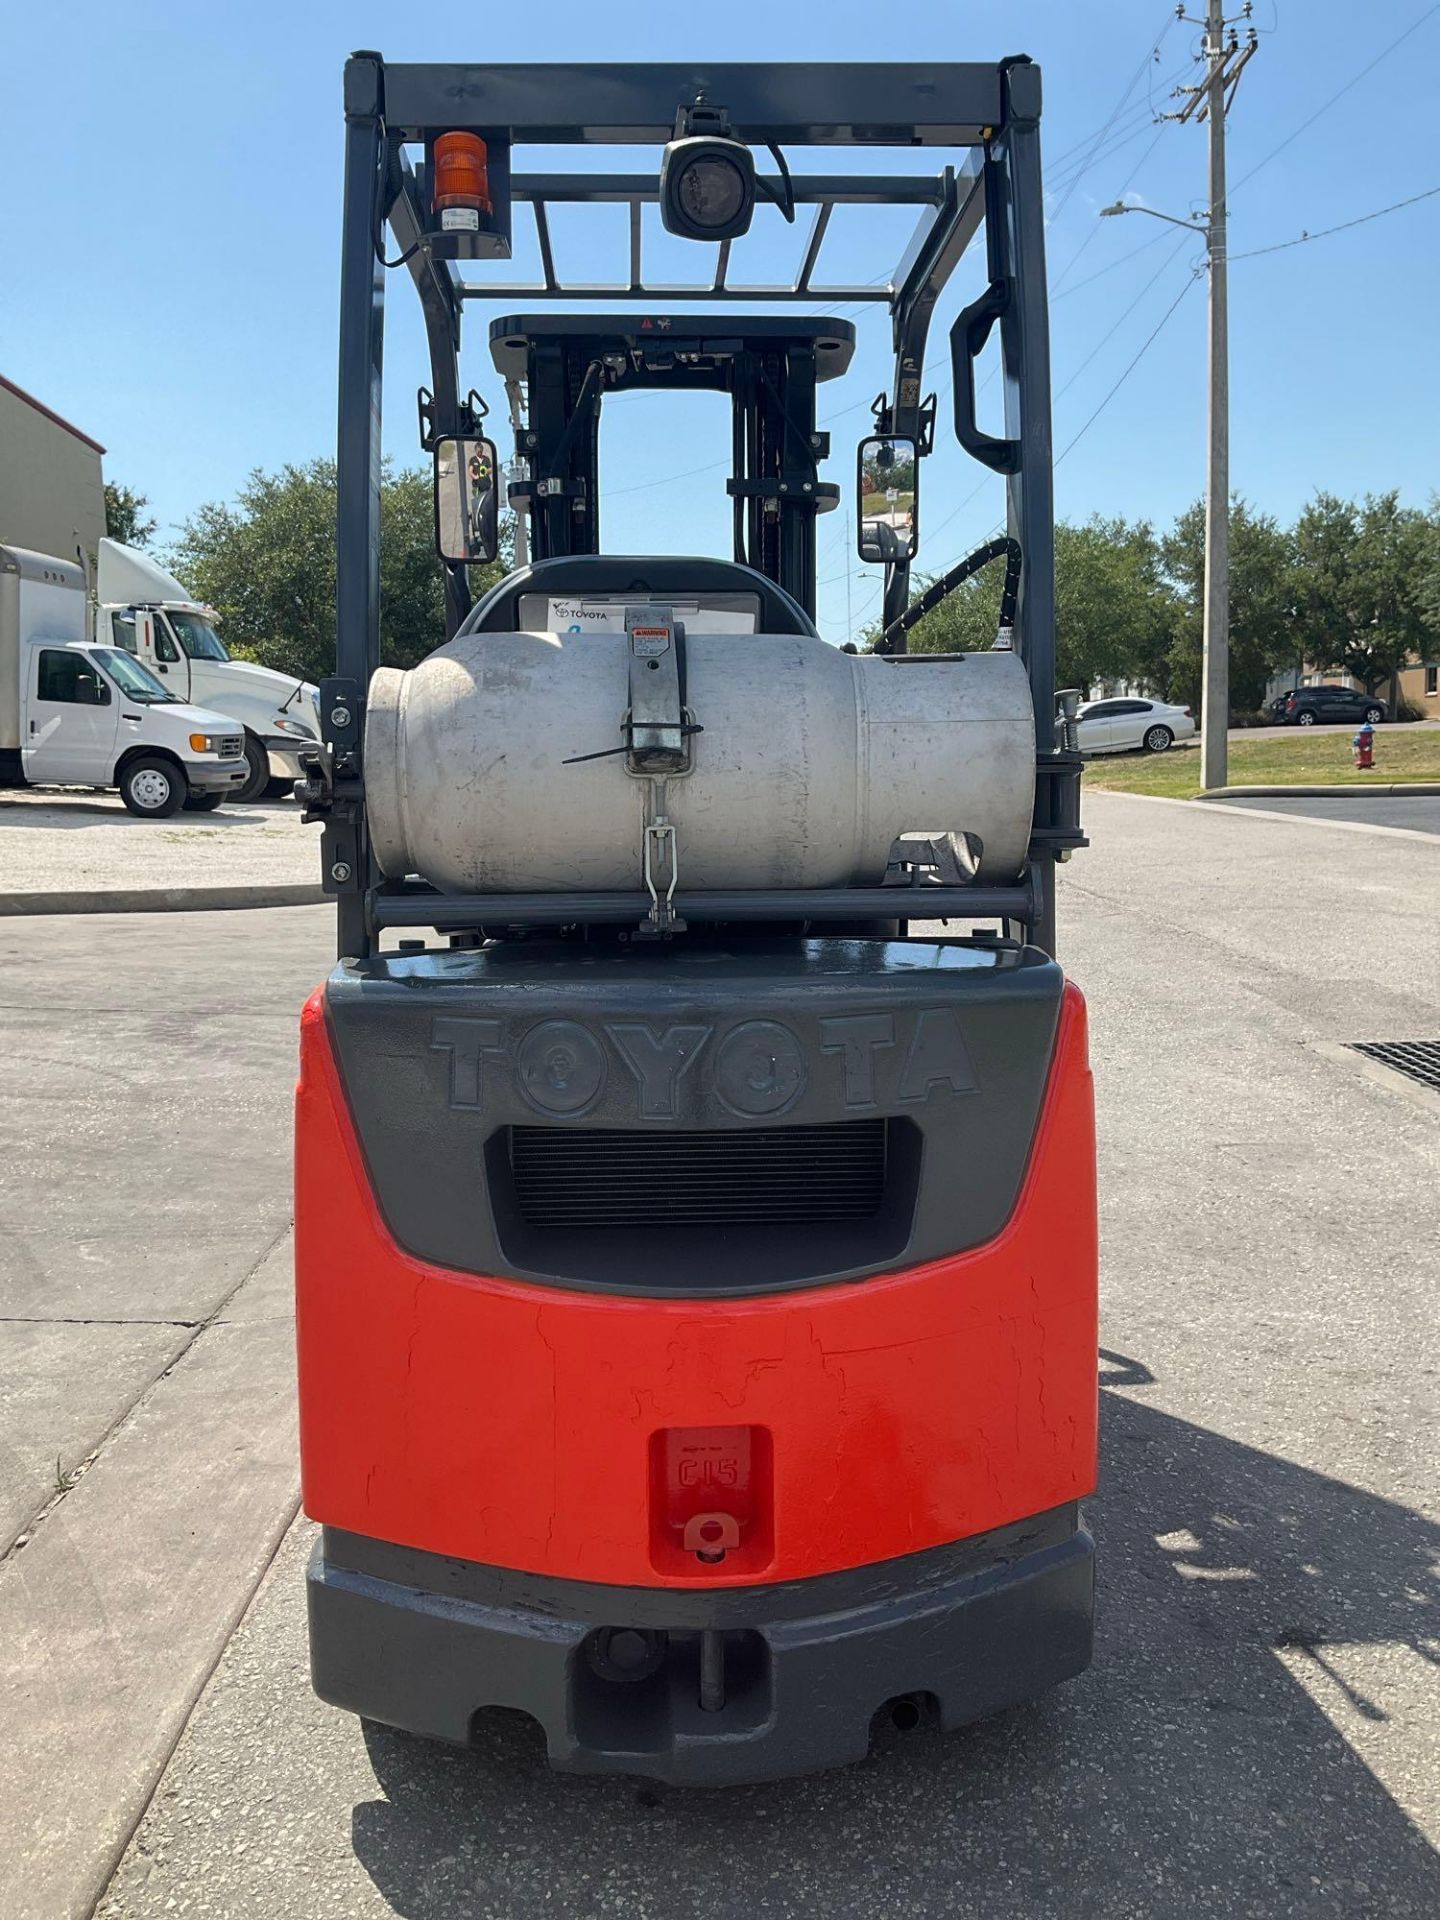 2019 TOYOTA FORKLIFT MODEL 8FGCU15, LP POWERED, APPROX MAX CAPACITY 2500, MAX HEIGHT 189in, TILT, - Image 4 of 12